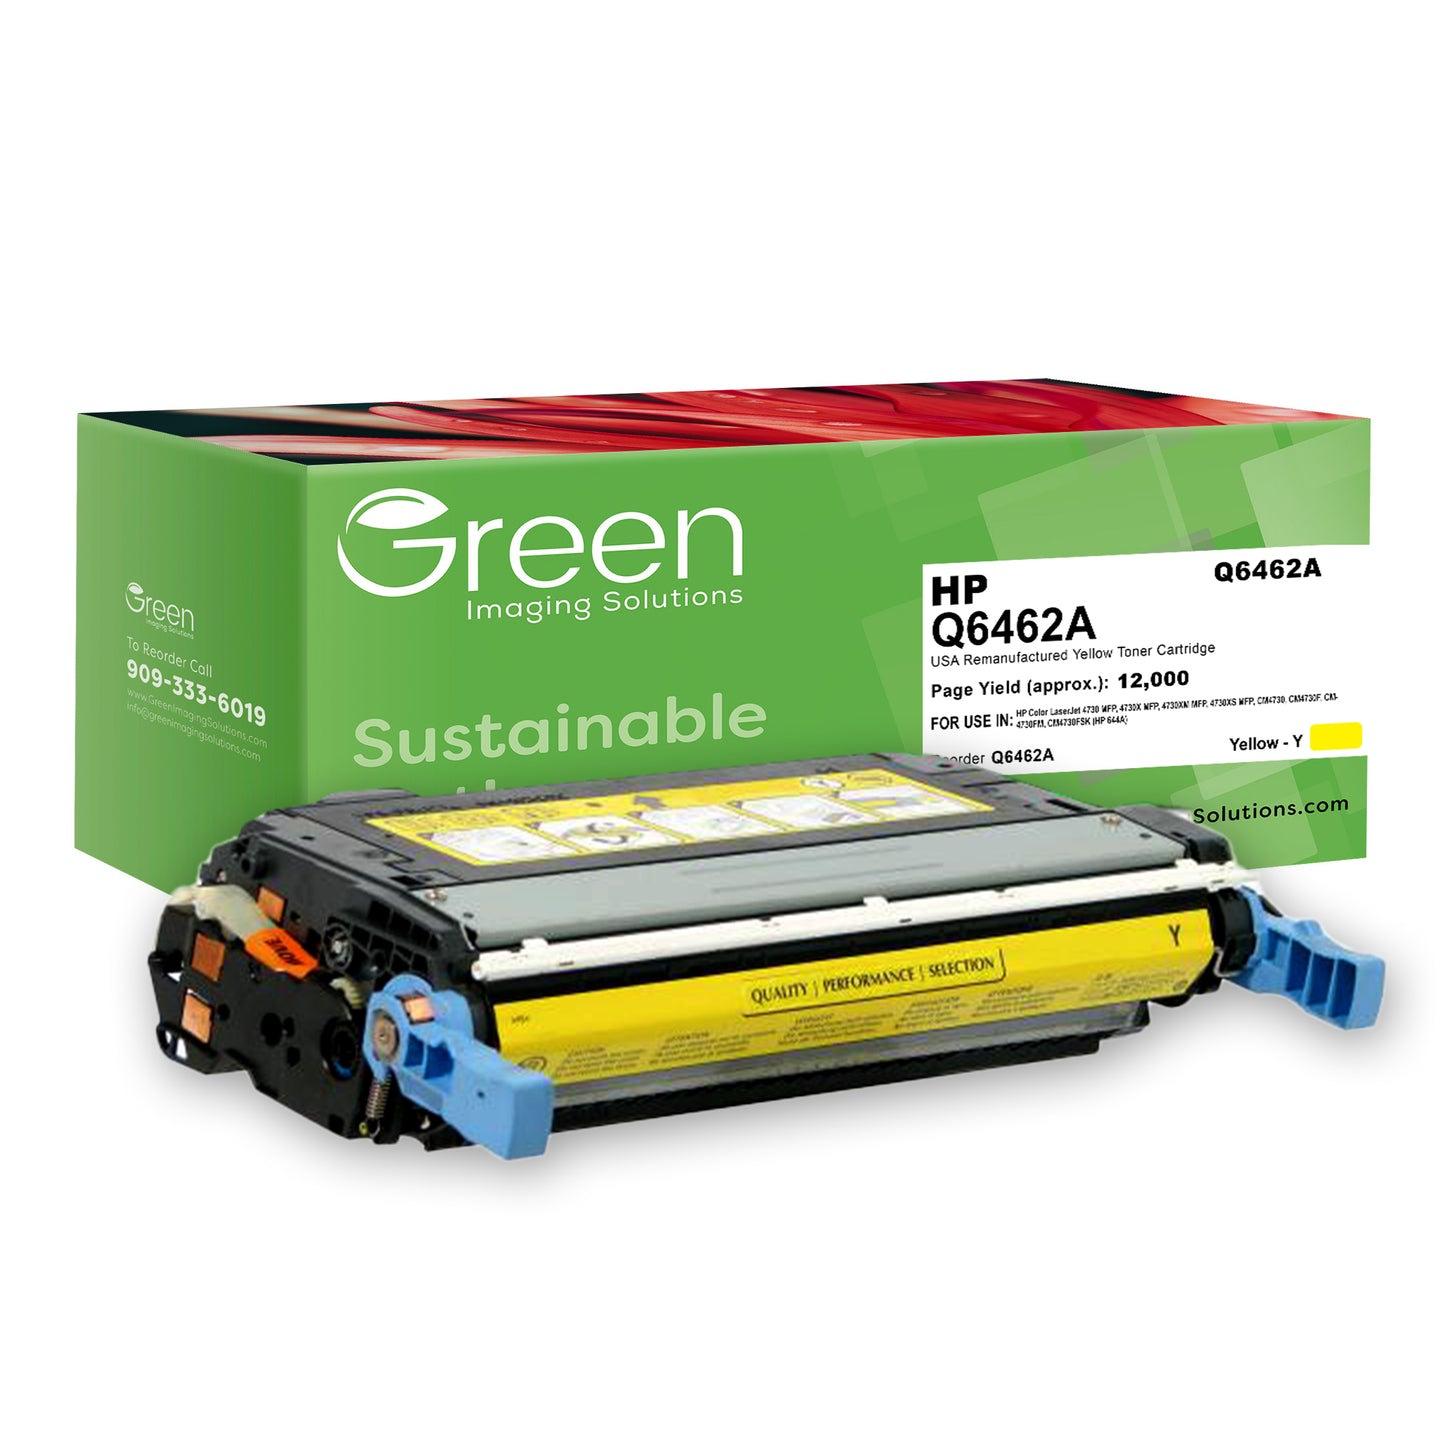 GIS USA Remanufactured Yellow Toner Cartridge for HP Q6462A (HP 644A)